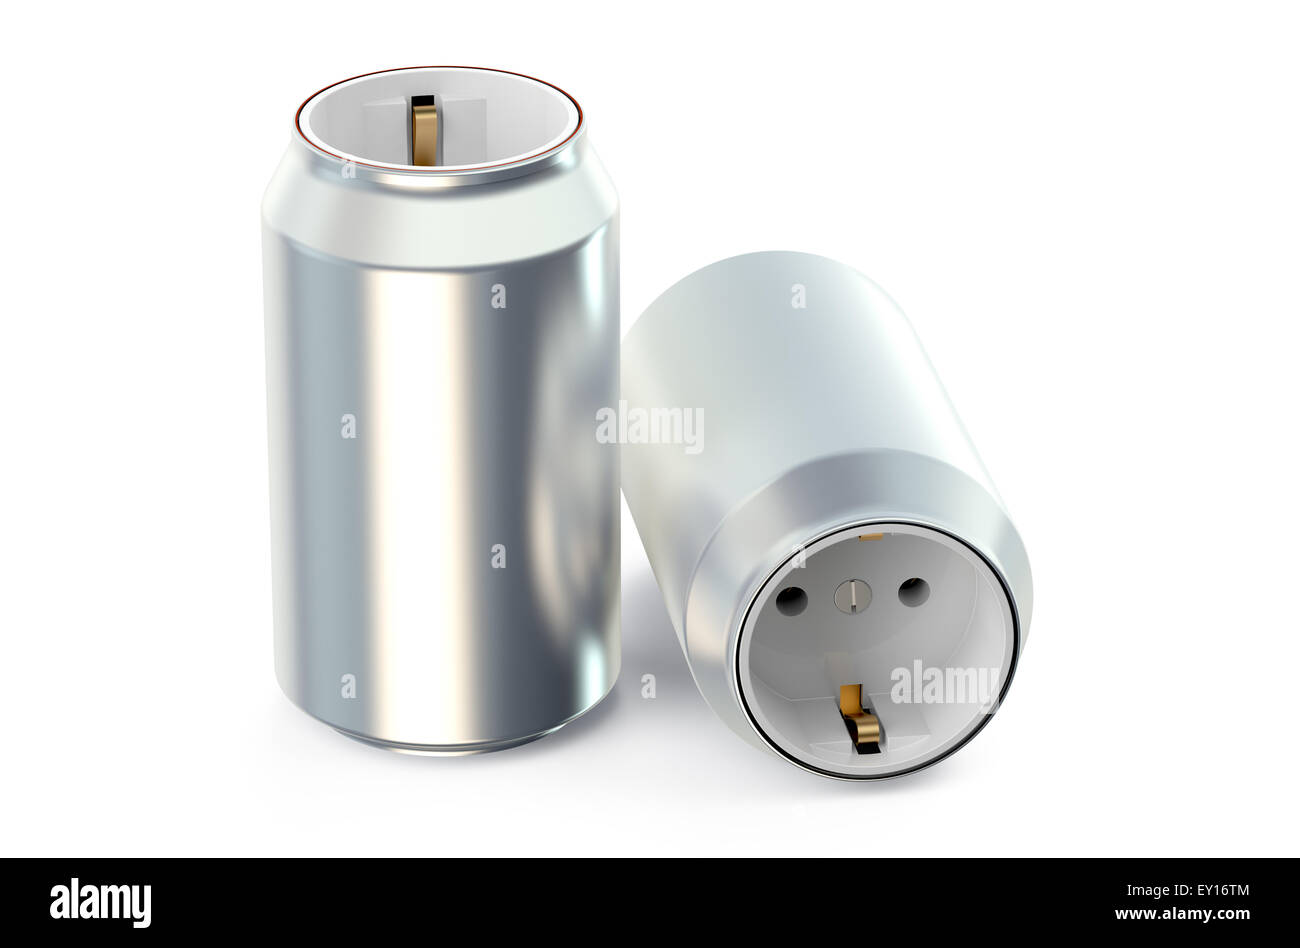 drink cans with socket, energy drink concept Stock Photo